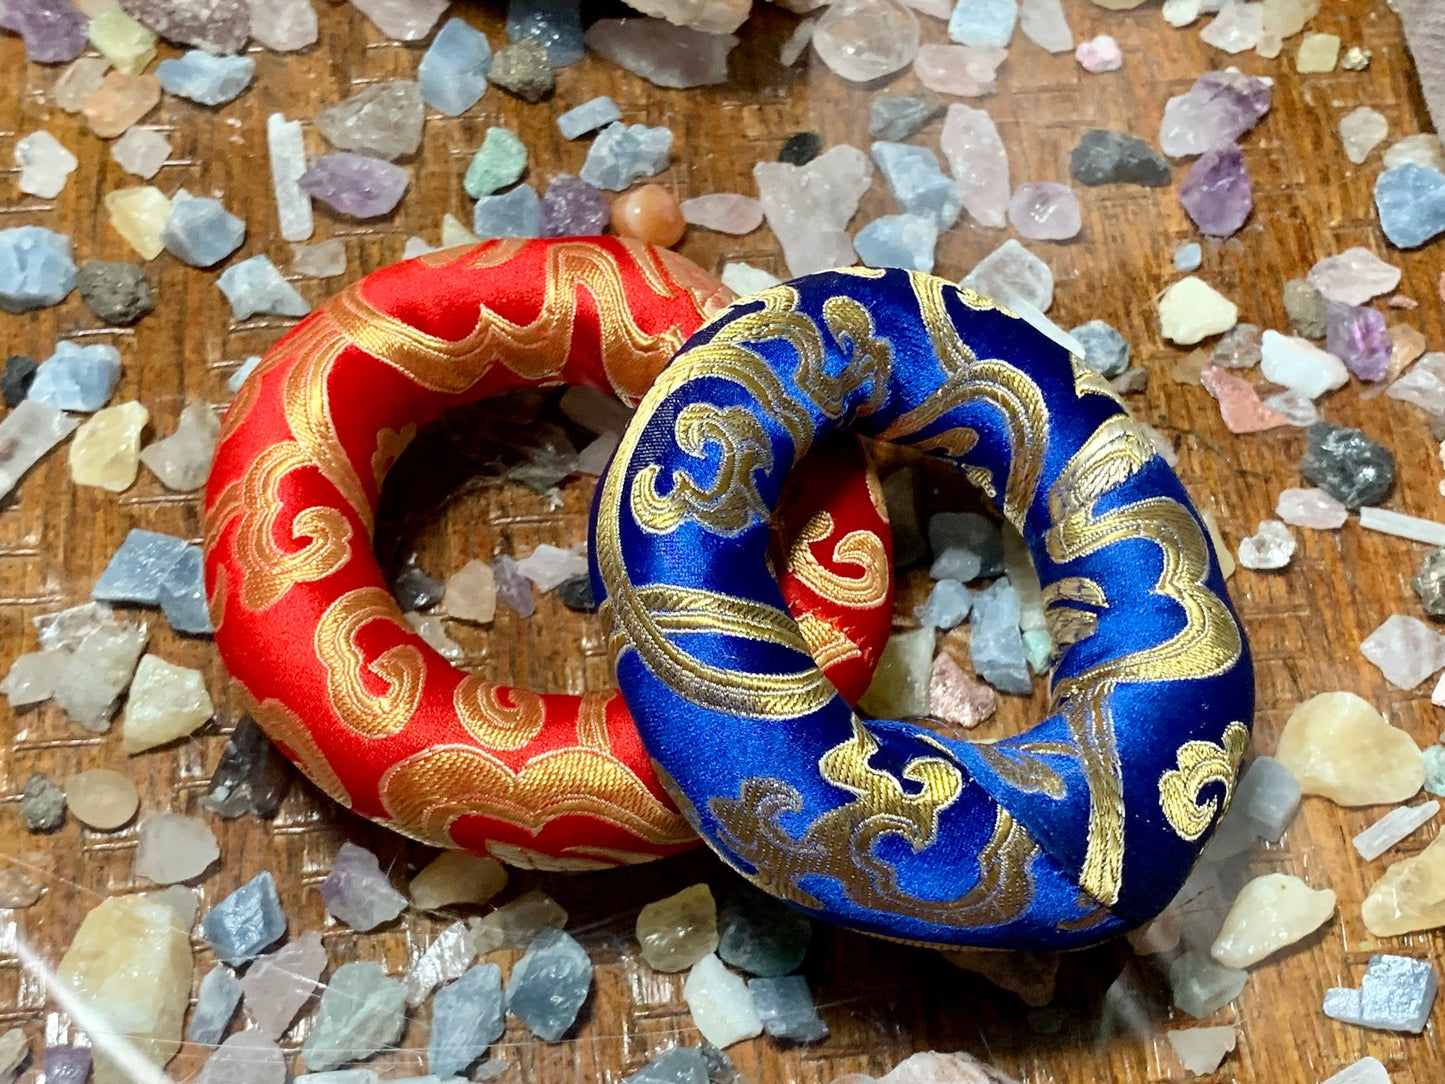 Tibetan Singing Bowl Silk Pillow Cushion Ring / Color Choice Red or Blue / Handmade in Nepal